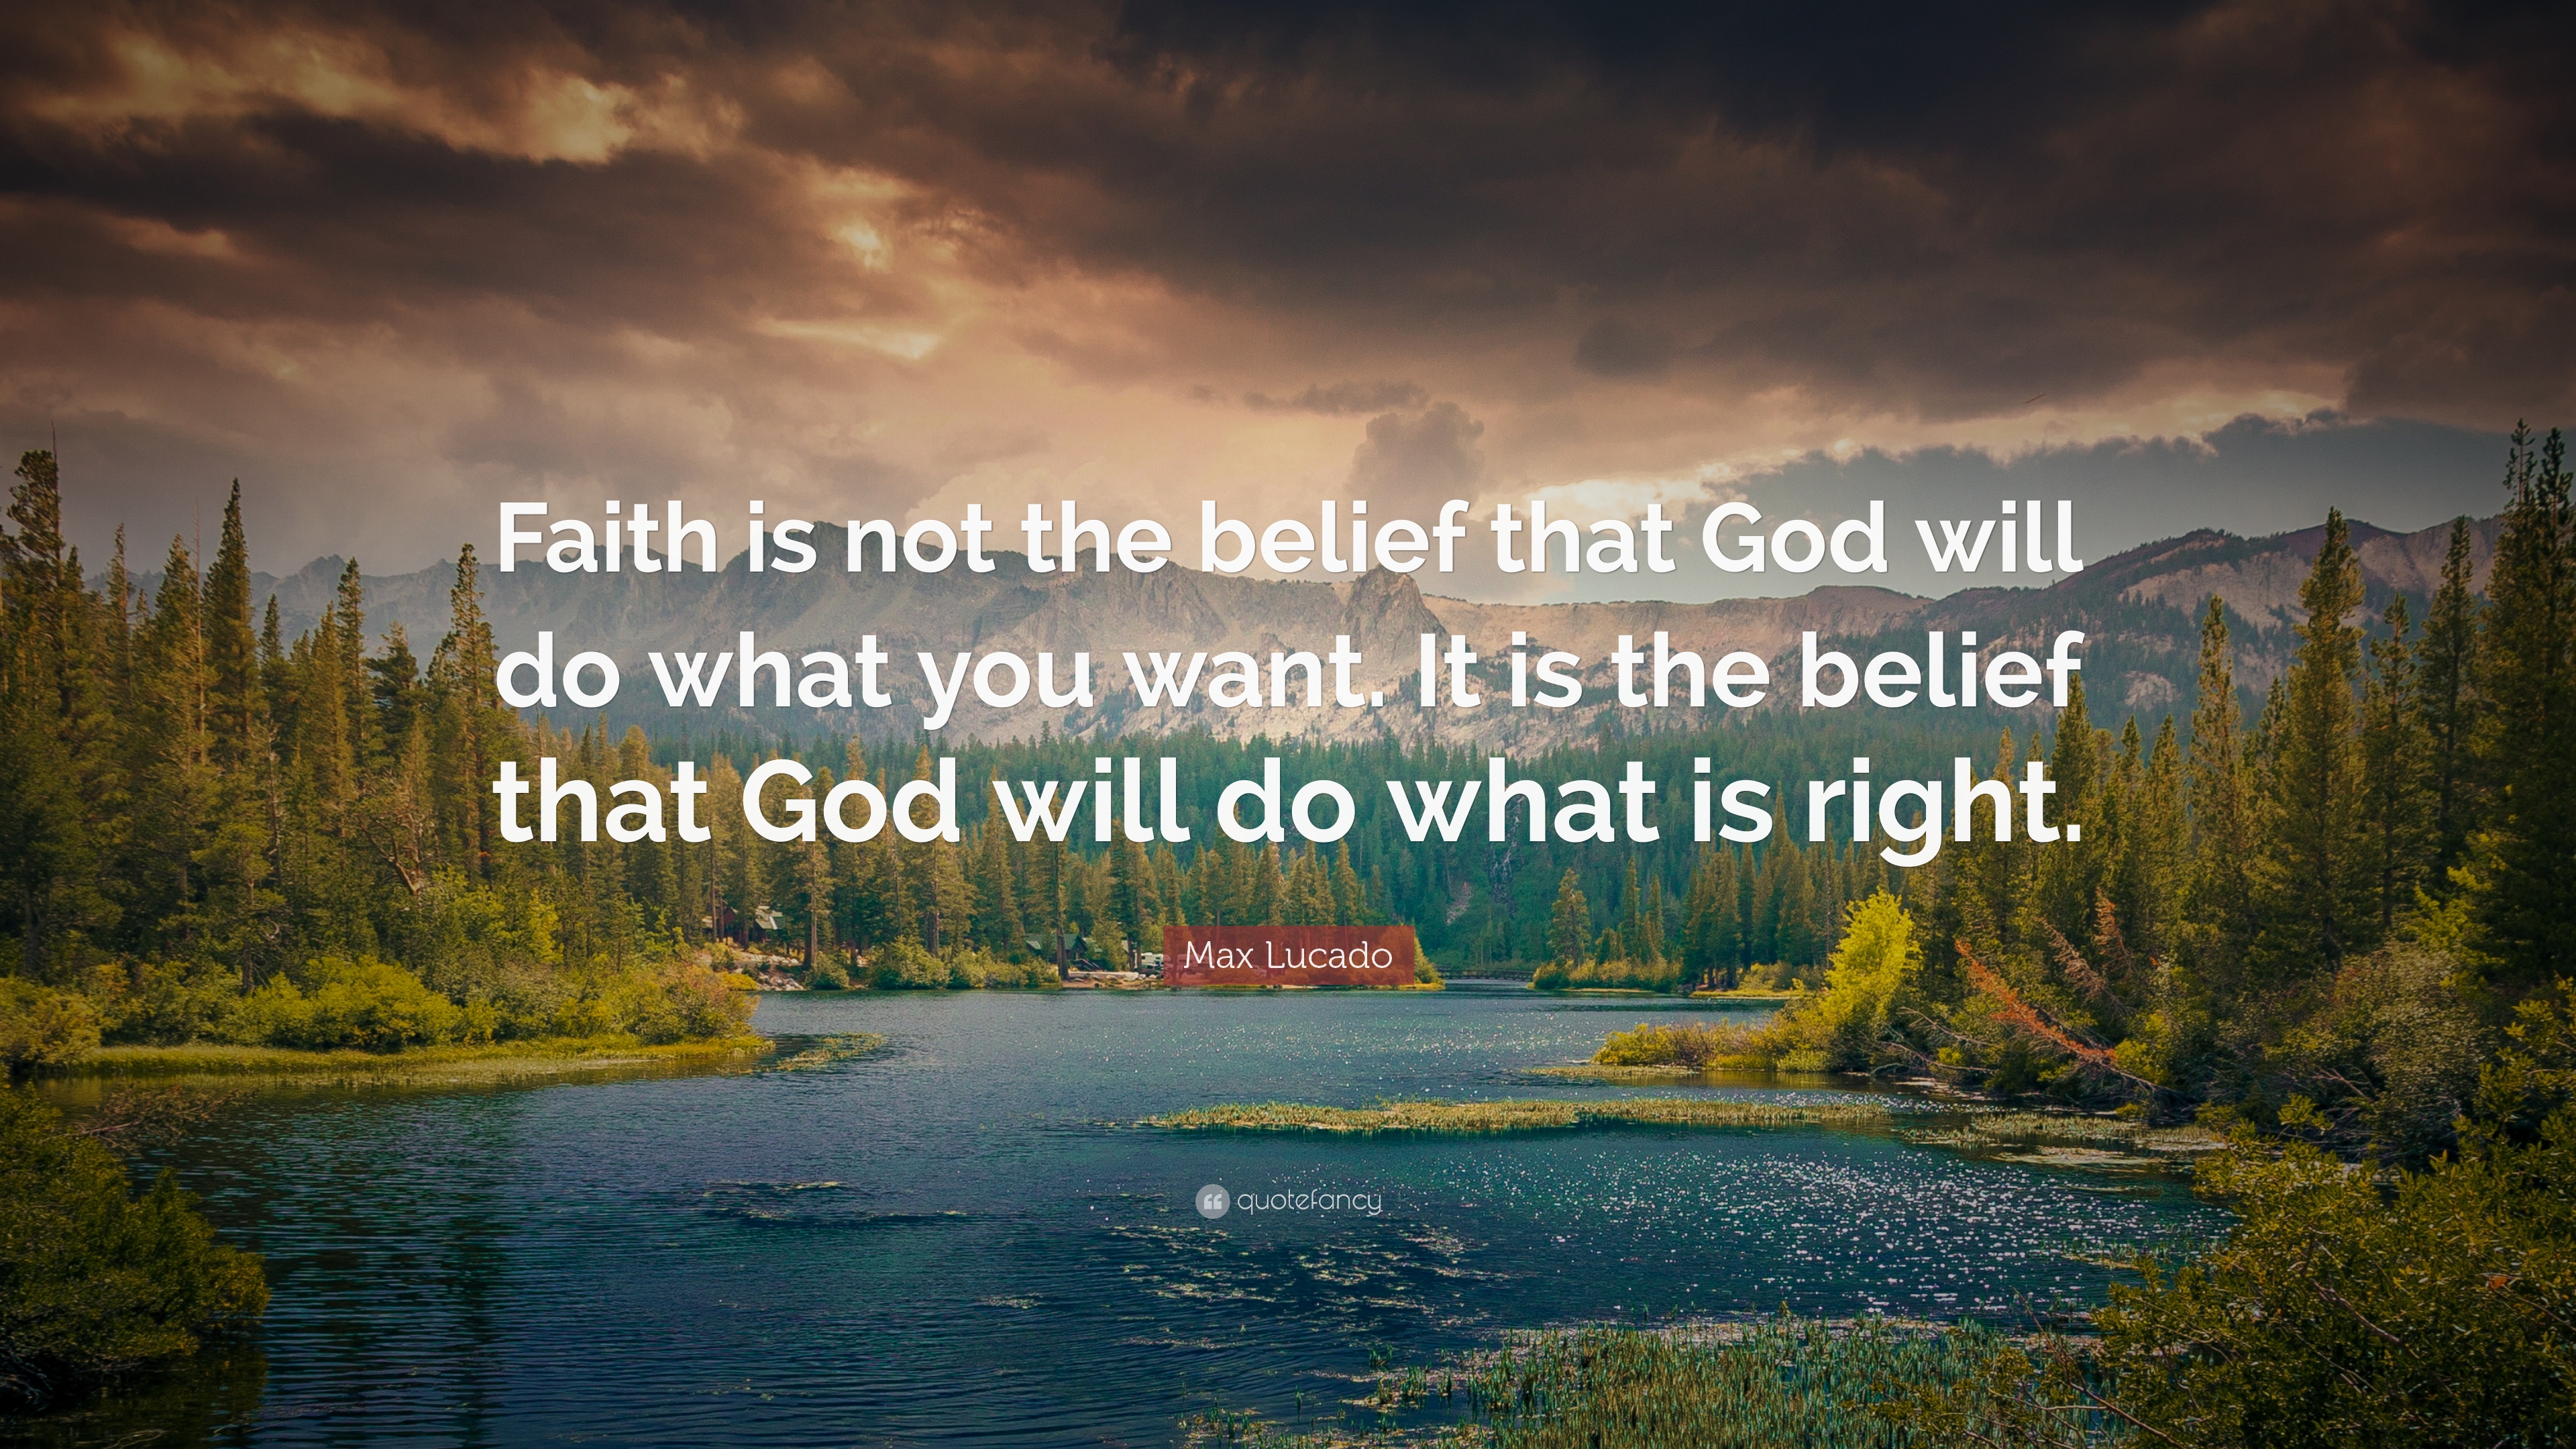 faith is not the belief that god will do what you want. it is the belief that god will do what is right. max lucado